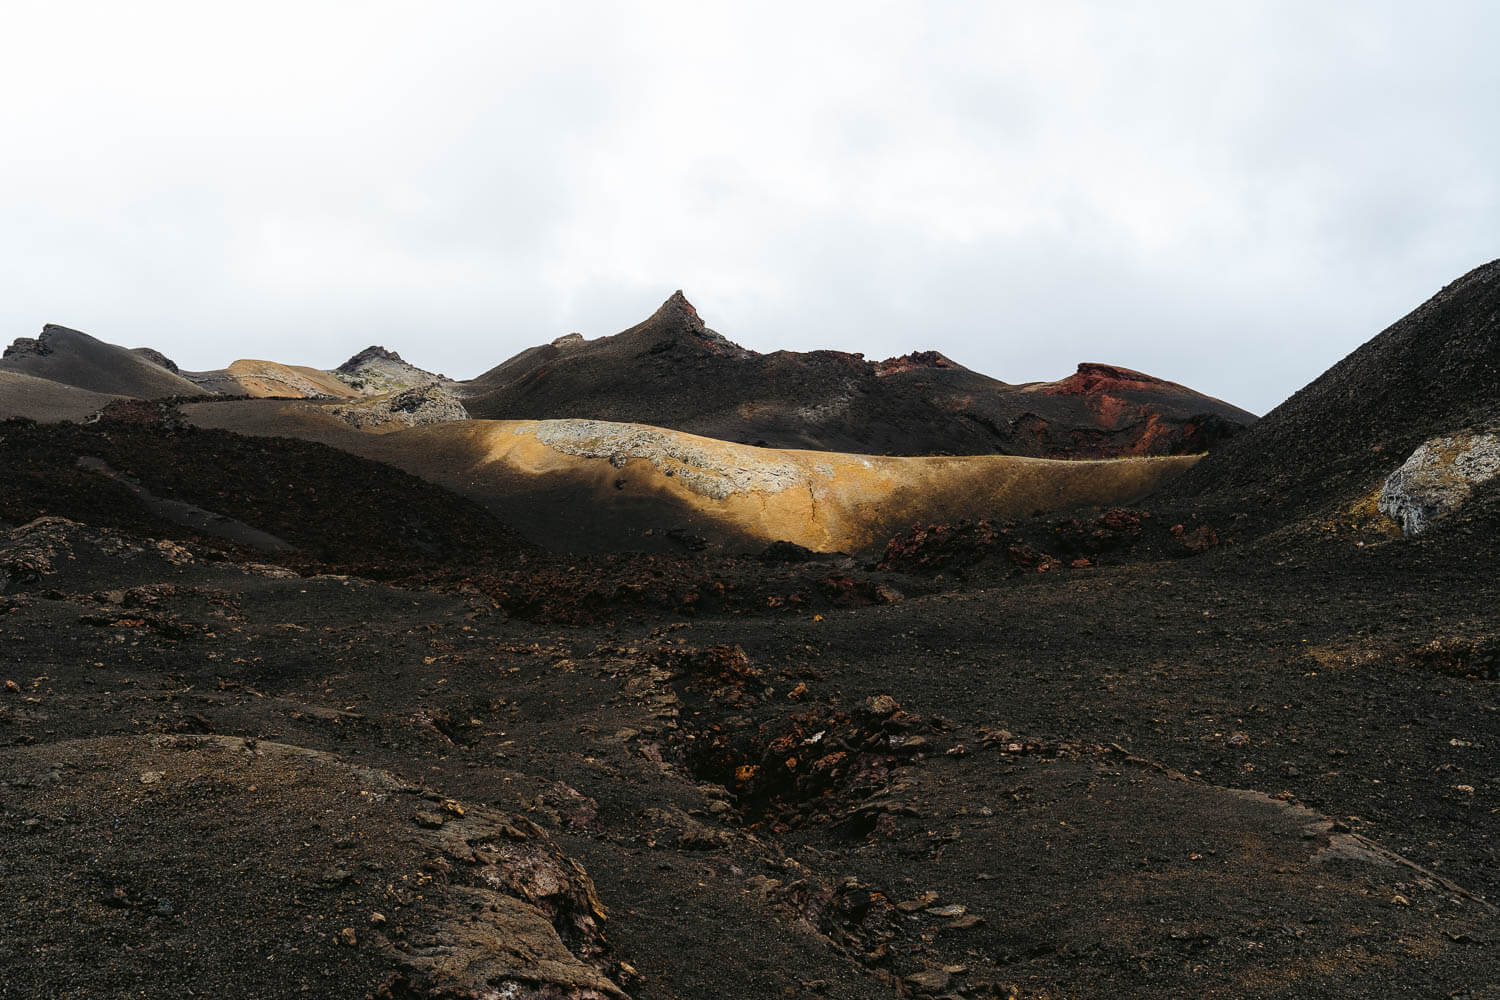 Sierra Negra and Chico Volcano, in Isabela island, Galápagos, a must in any Galapagos Itinerary